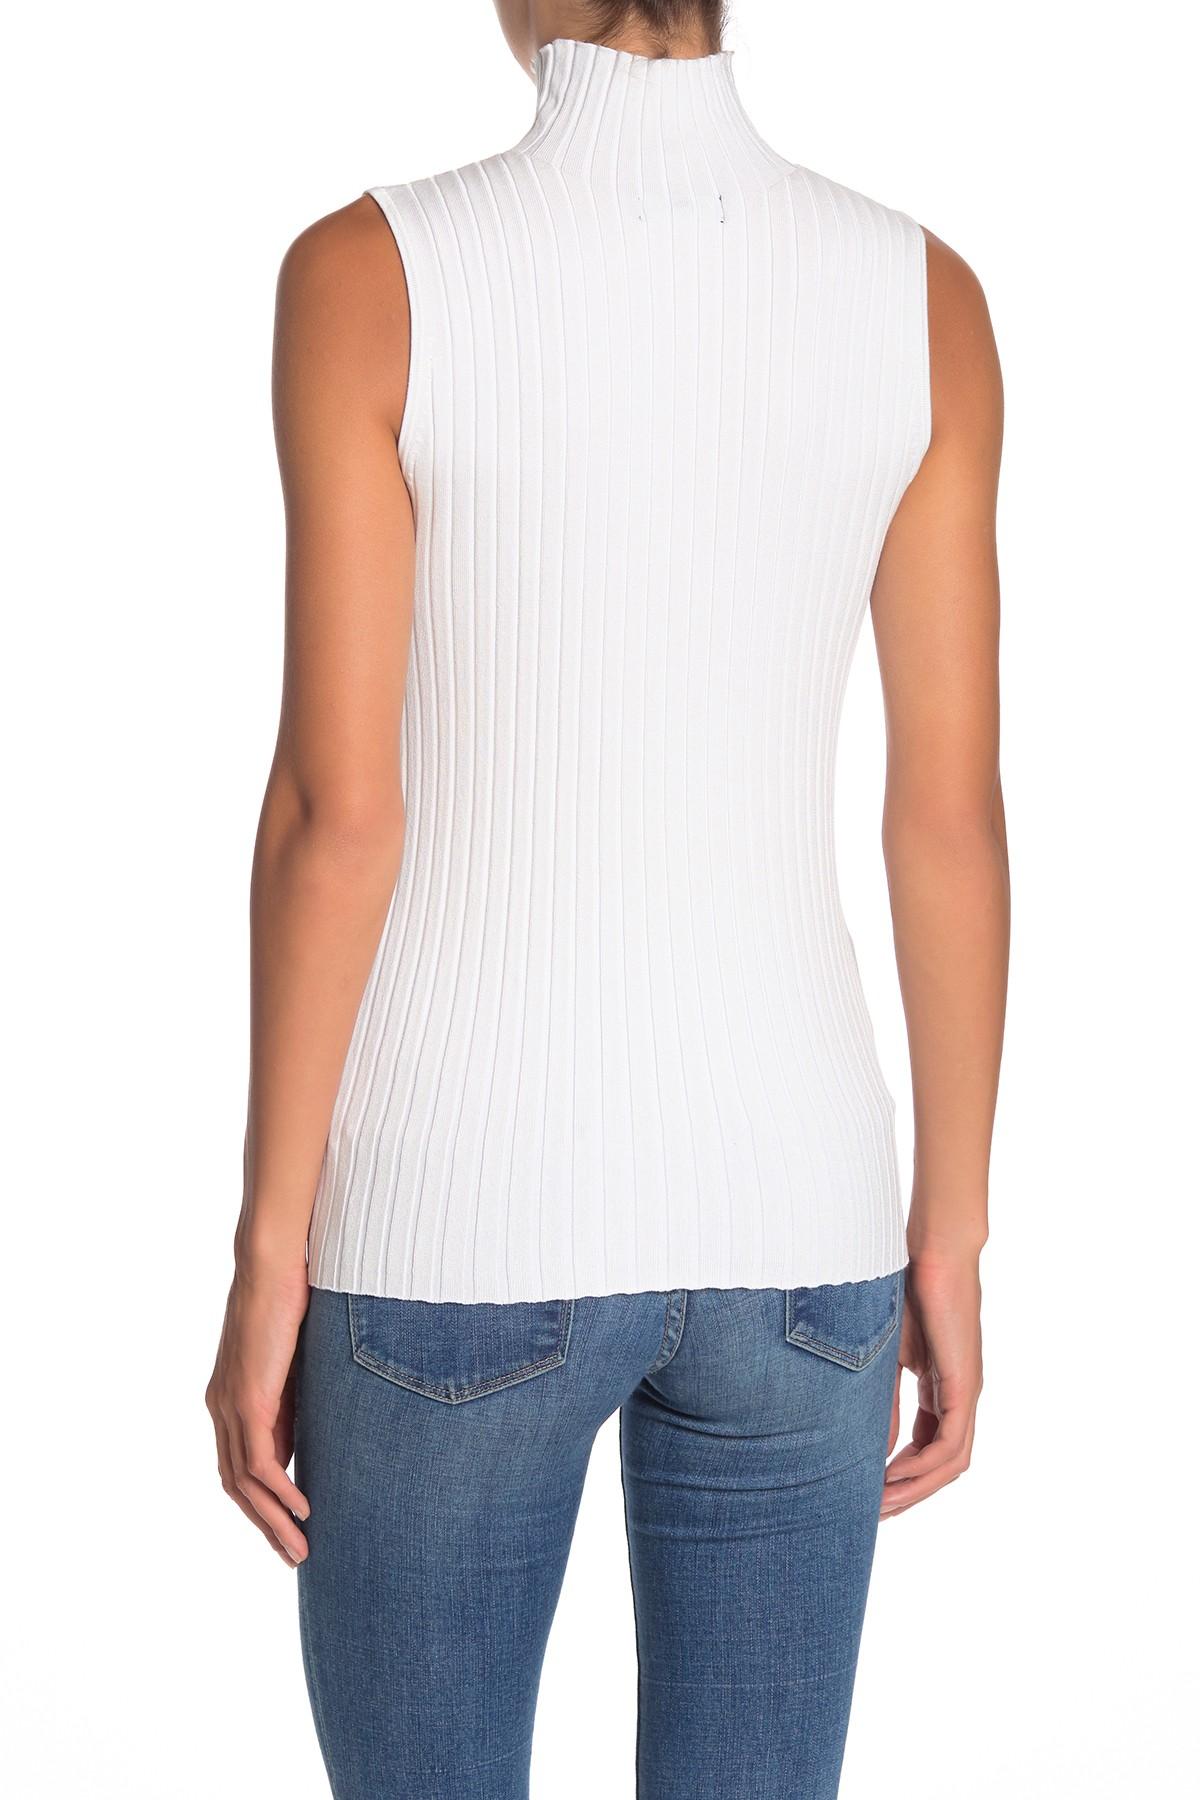 Download 525 America Synthetic Mock Neck Rib Knit Tank Top in ...